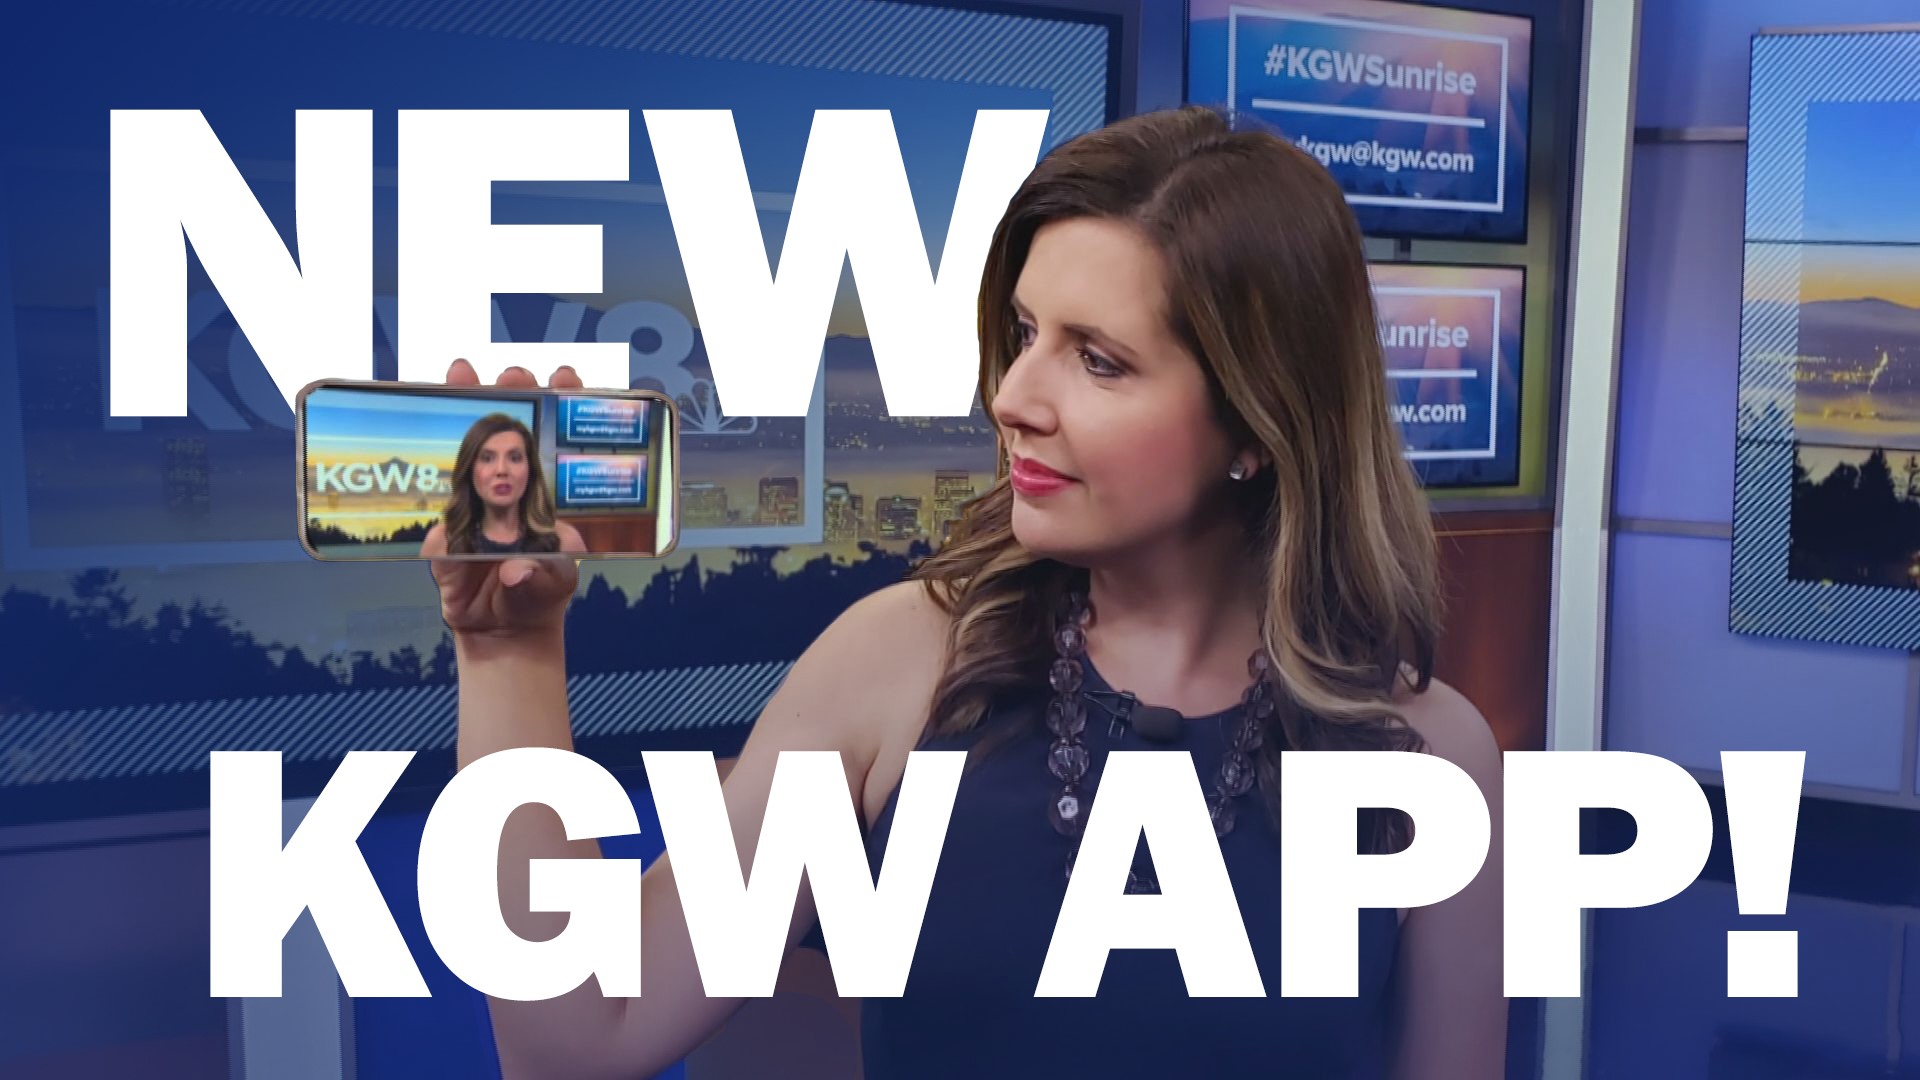 Keep yourself informed with the new KGW app. 
Here's a look at some of the features we love!
If it doesn’t update automatically, delete the old and download the new! http://on.kgw.com/newkgwapp